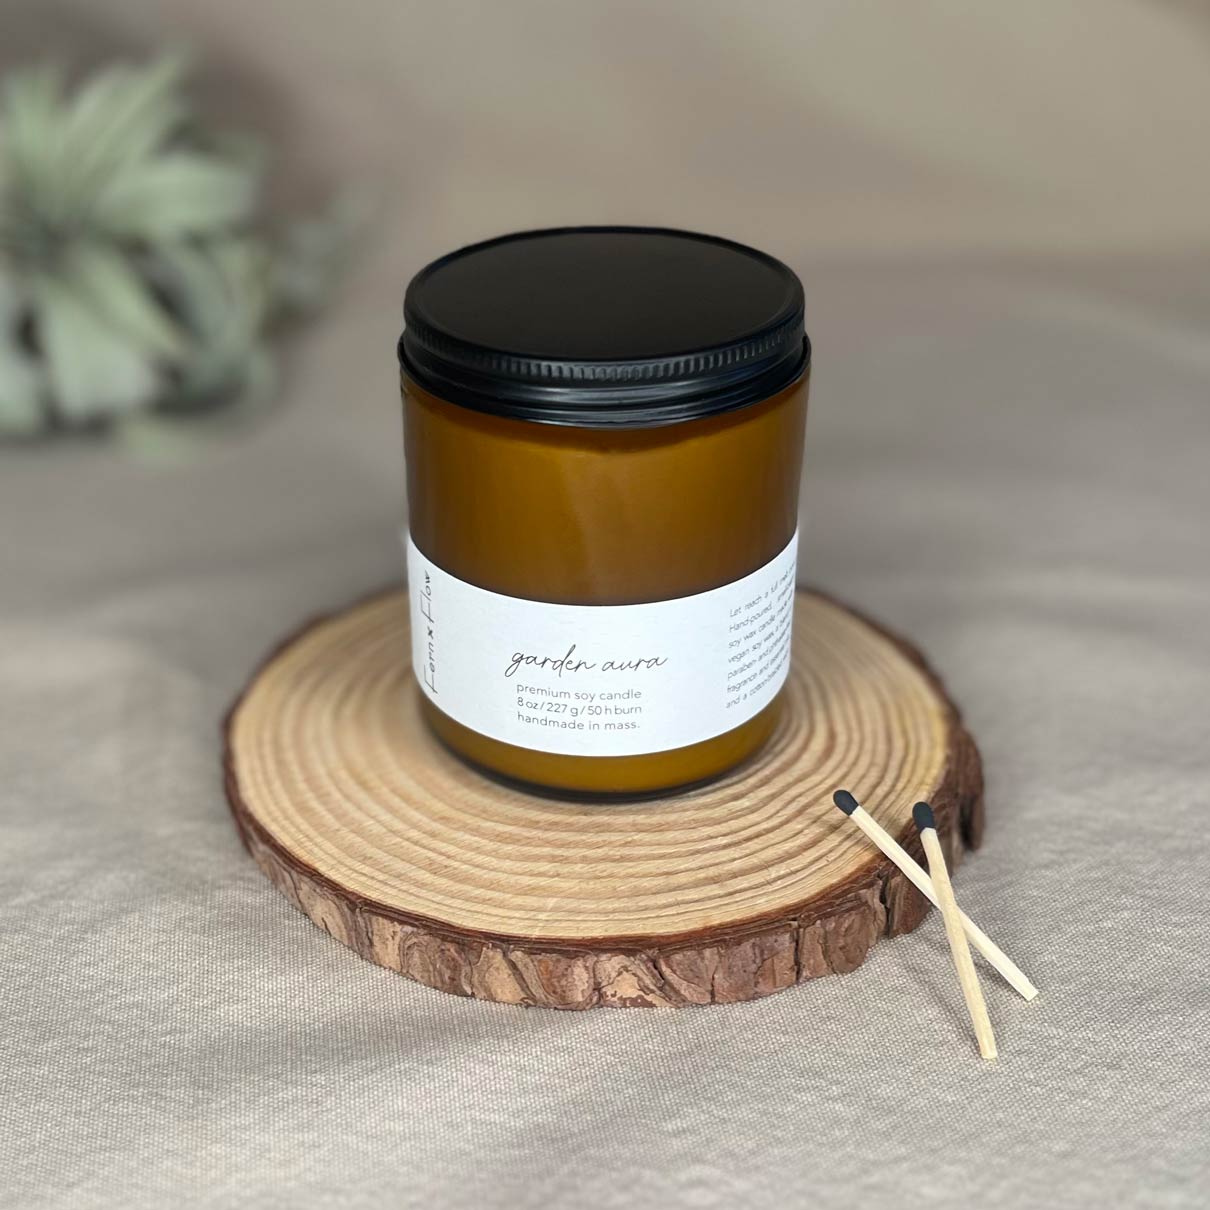 Eight-ounce Fern x Flow Garden Aura floral scented soy candle in an amber jar with black matte lid and two black-tipped safety matches crossed on the right side with a large air plant out-of-focus in the background.